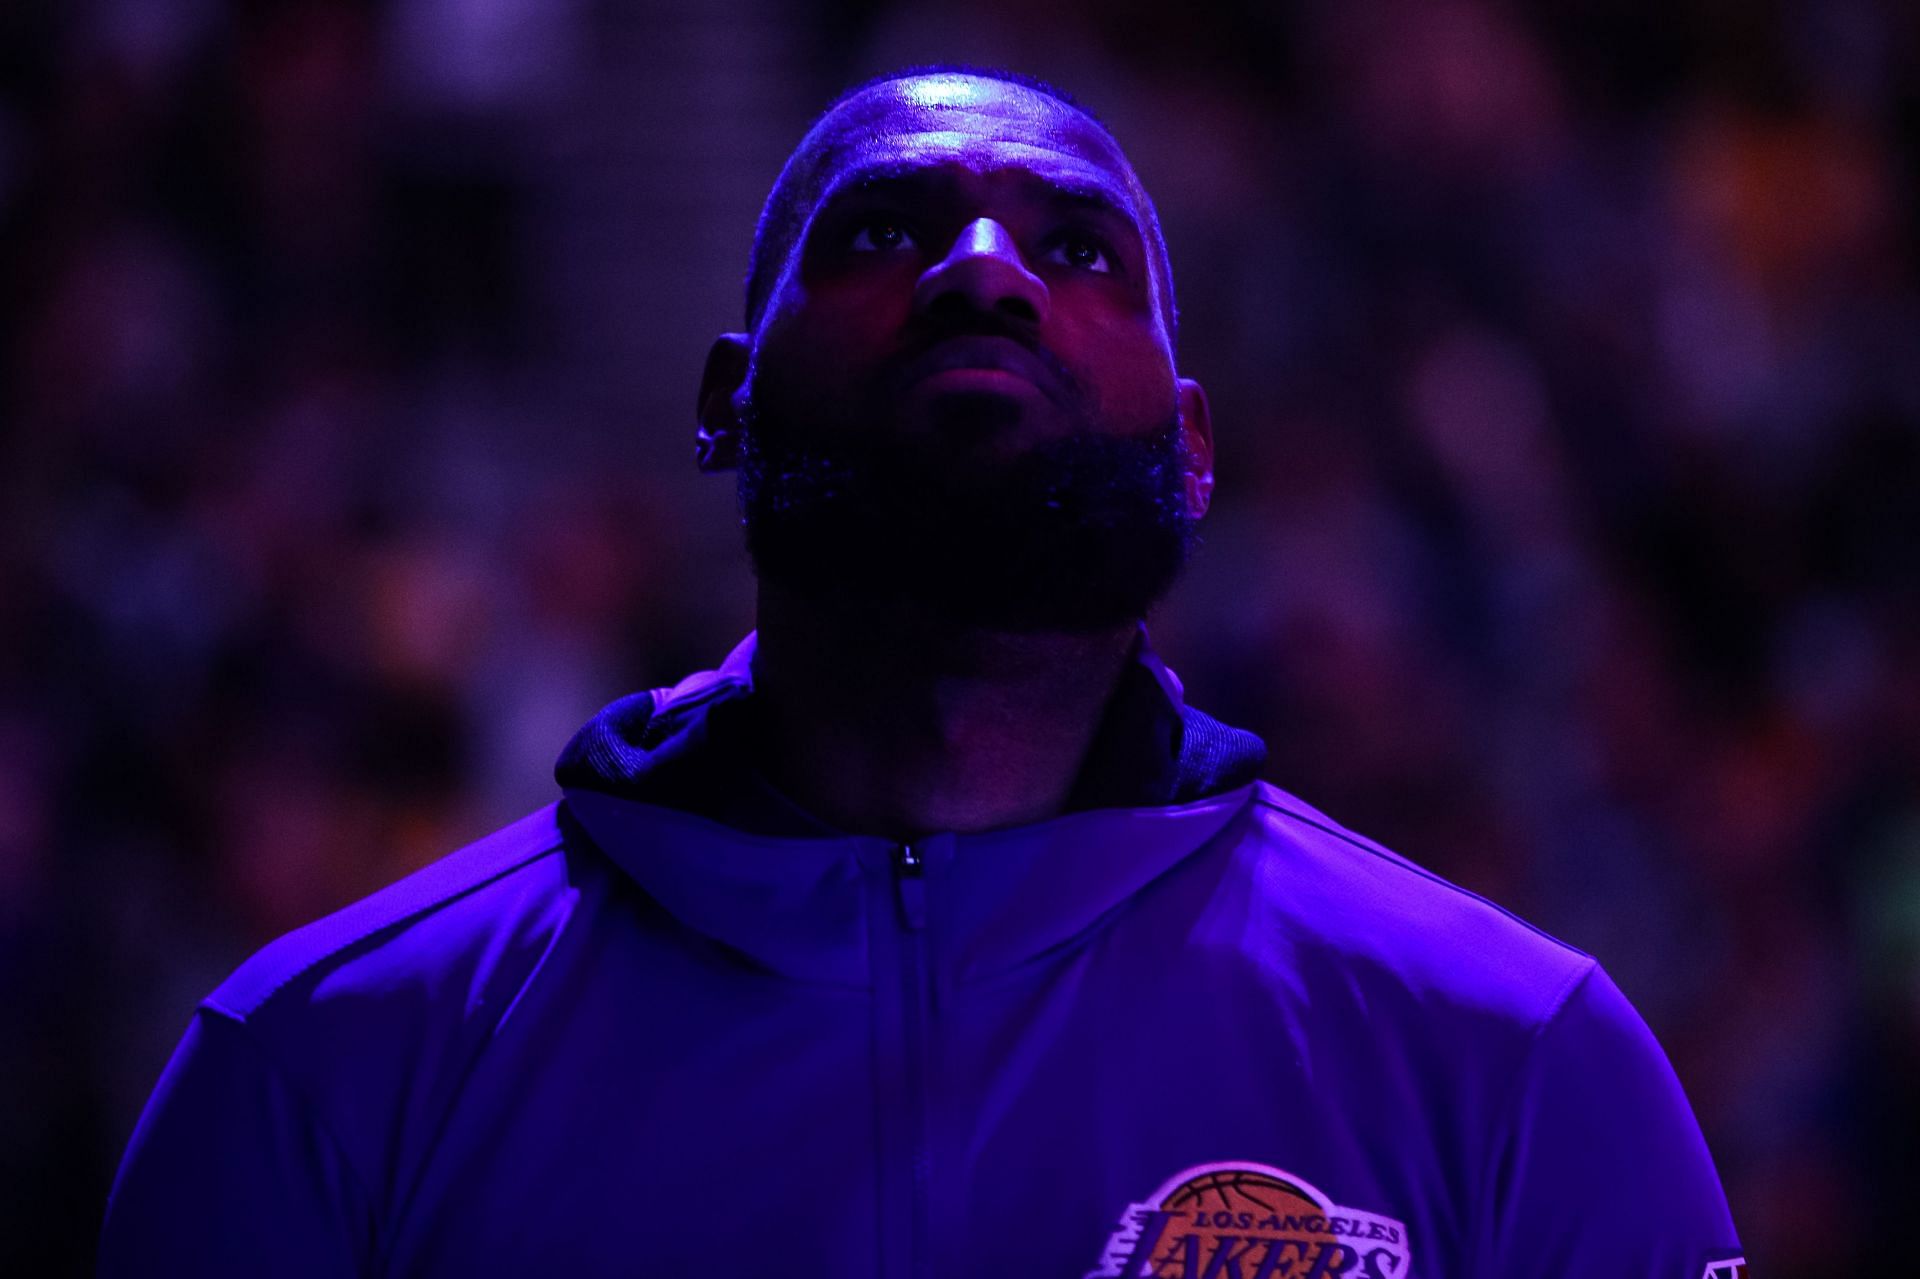 LA Lakers superstar forward LeBron James earns praise from Jared Dudley.